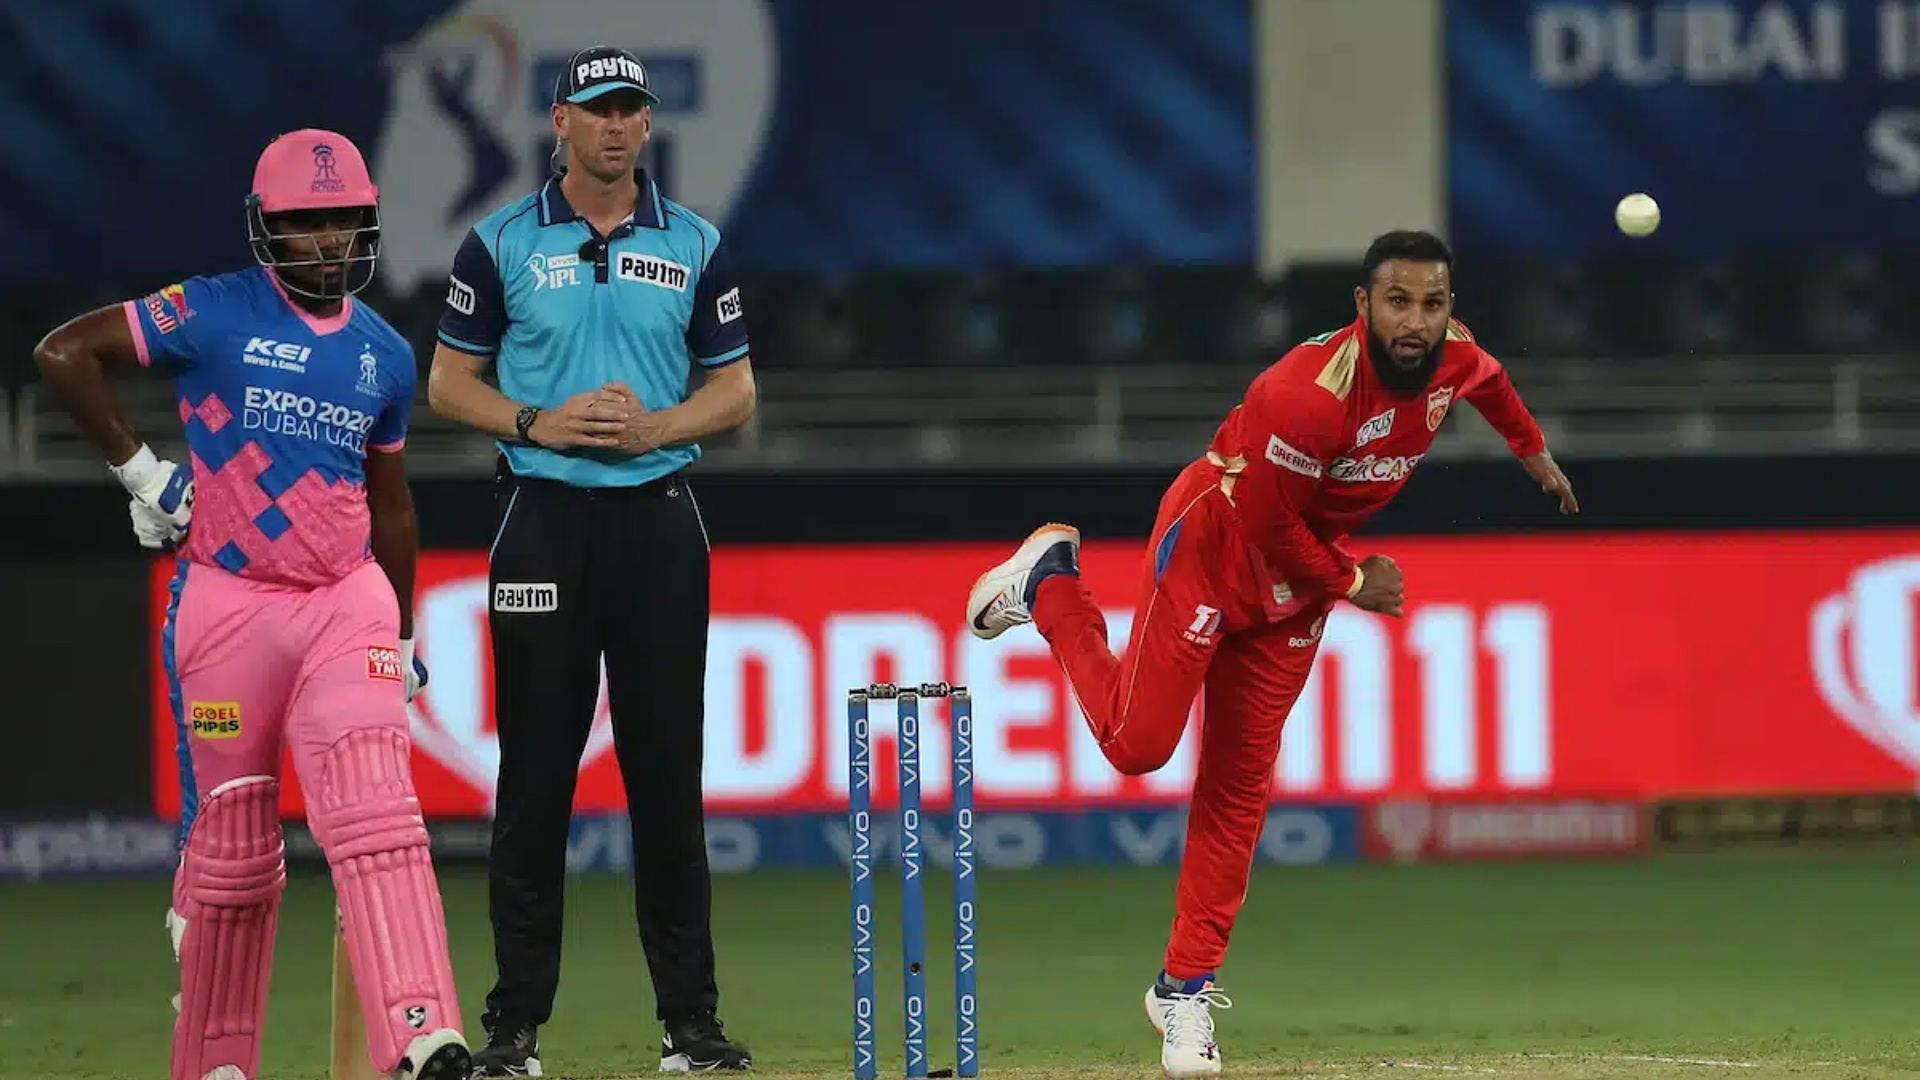 Adil Rashid could be a quality Dream11 differential